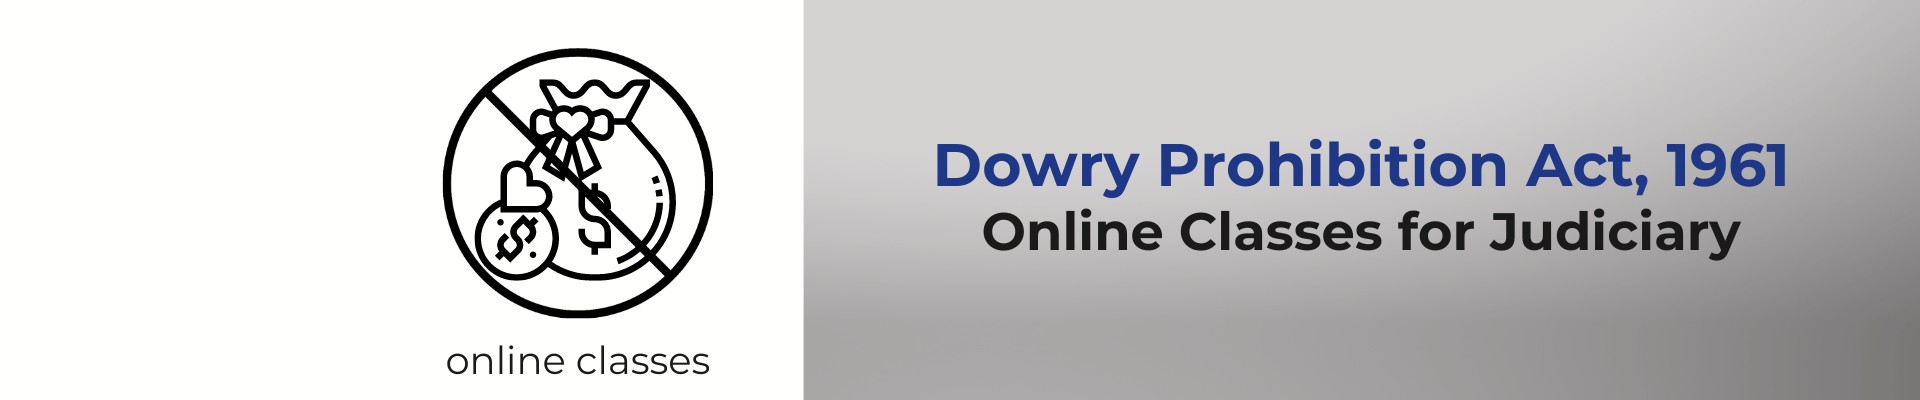 DOWRY PROHIBITION ACT